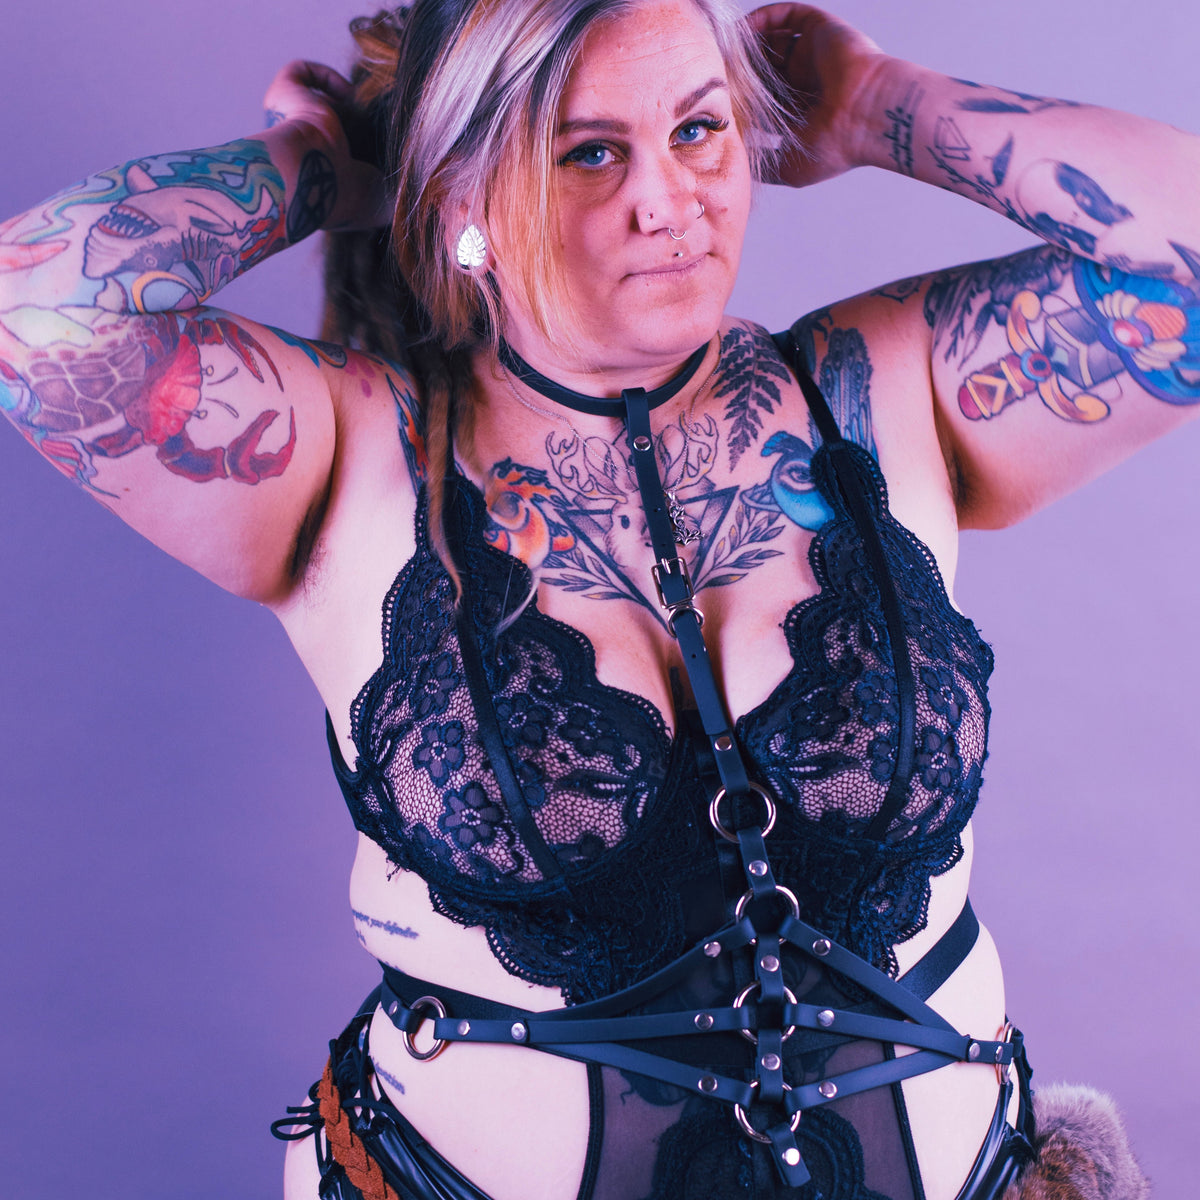 Woman wearing black lace lingerie and a black waist cinch harness.